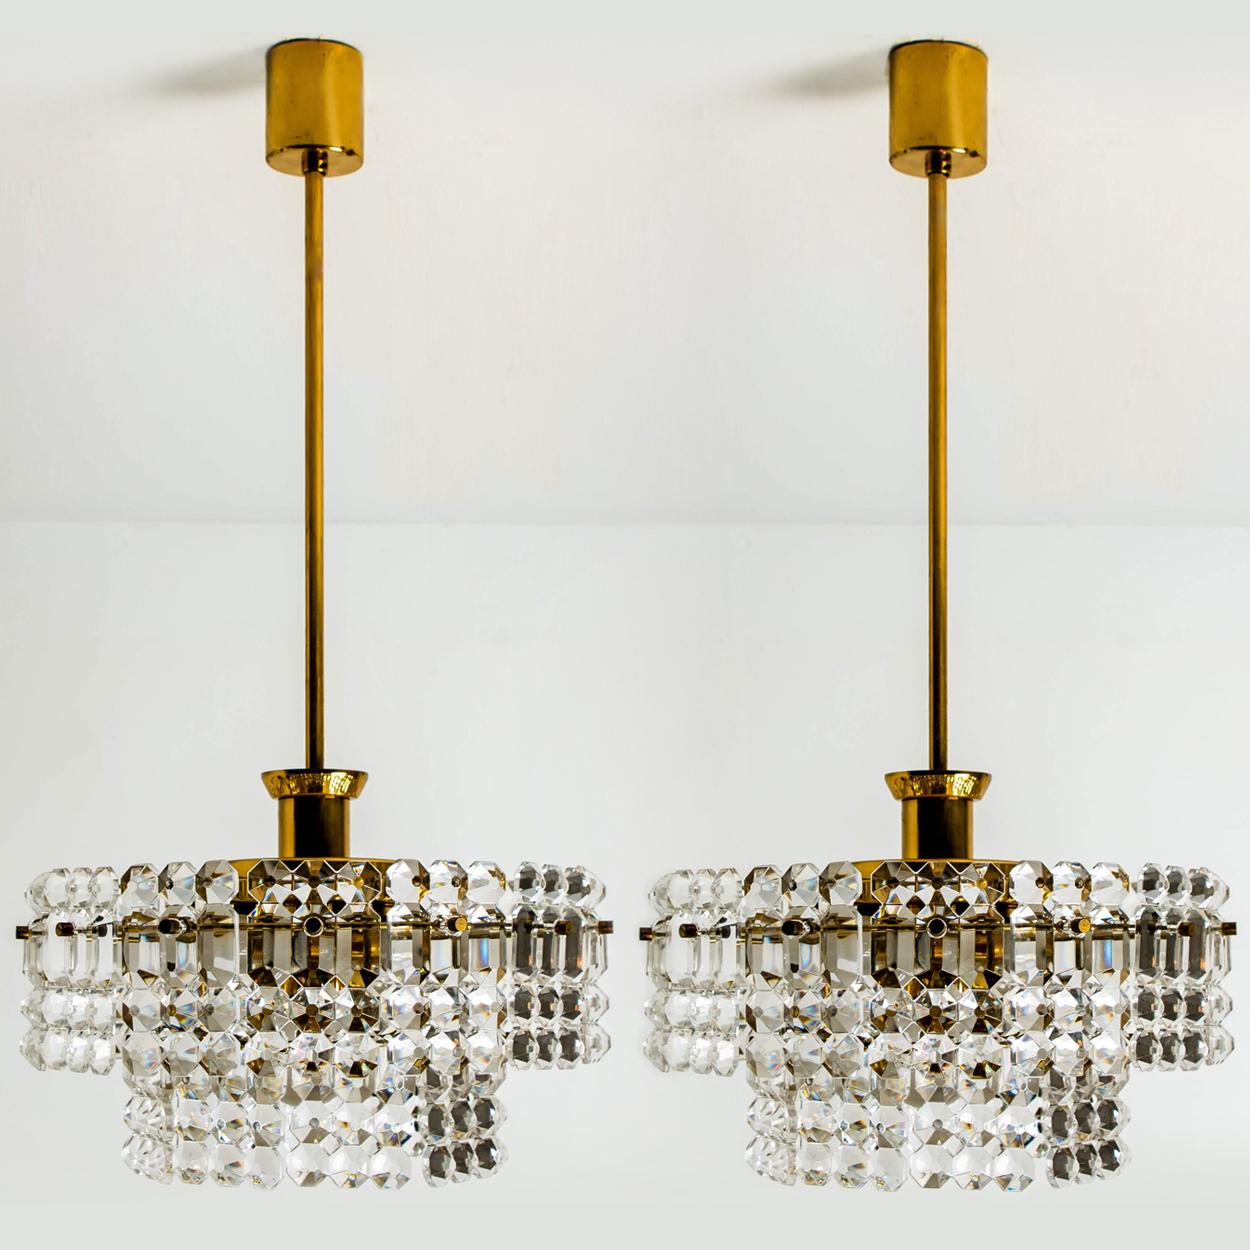 Pair of Gold-Plated Kinkeldey Crystal Glass Chandeliers, 1960s For Sale 2